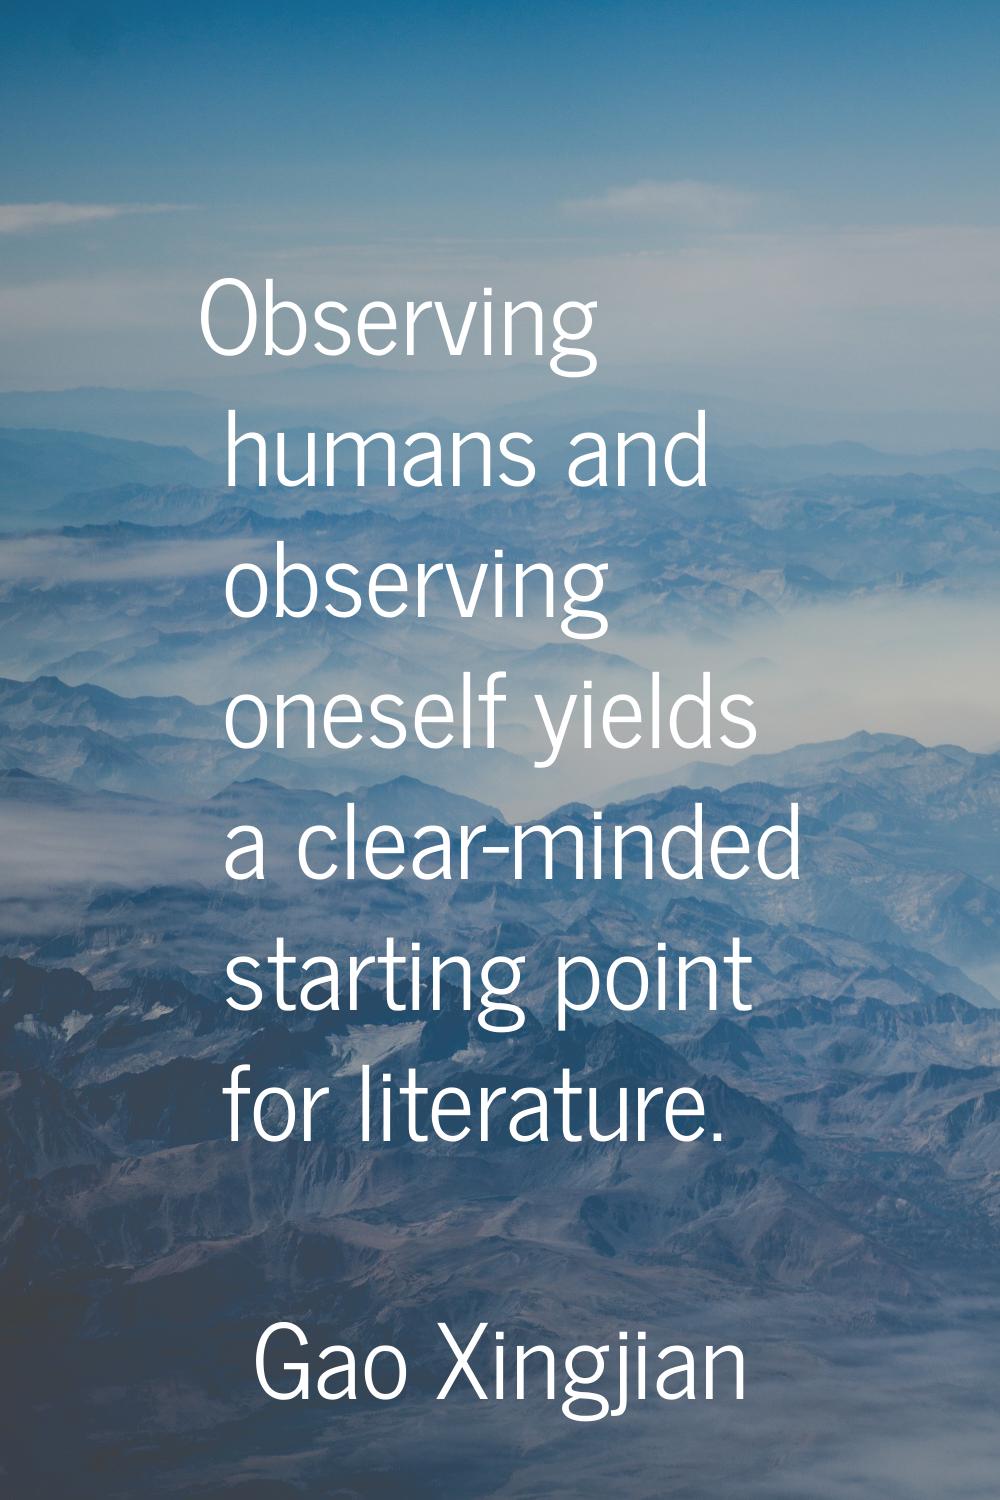 Observing humans and observing oneself yields a clear-minded starting point for literature.